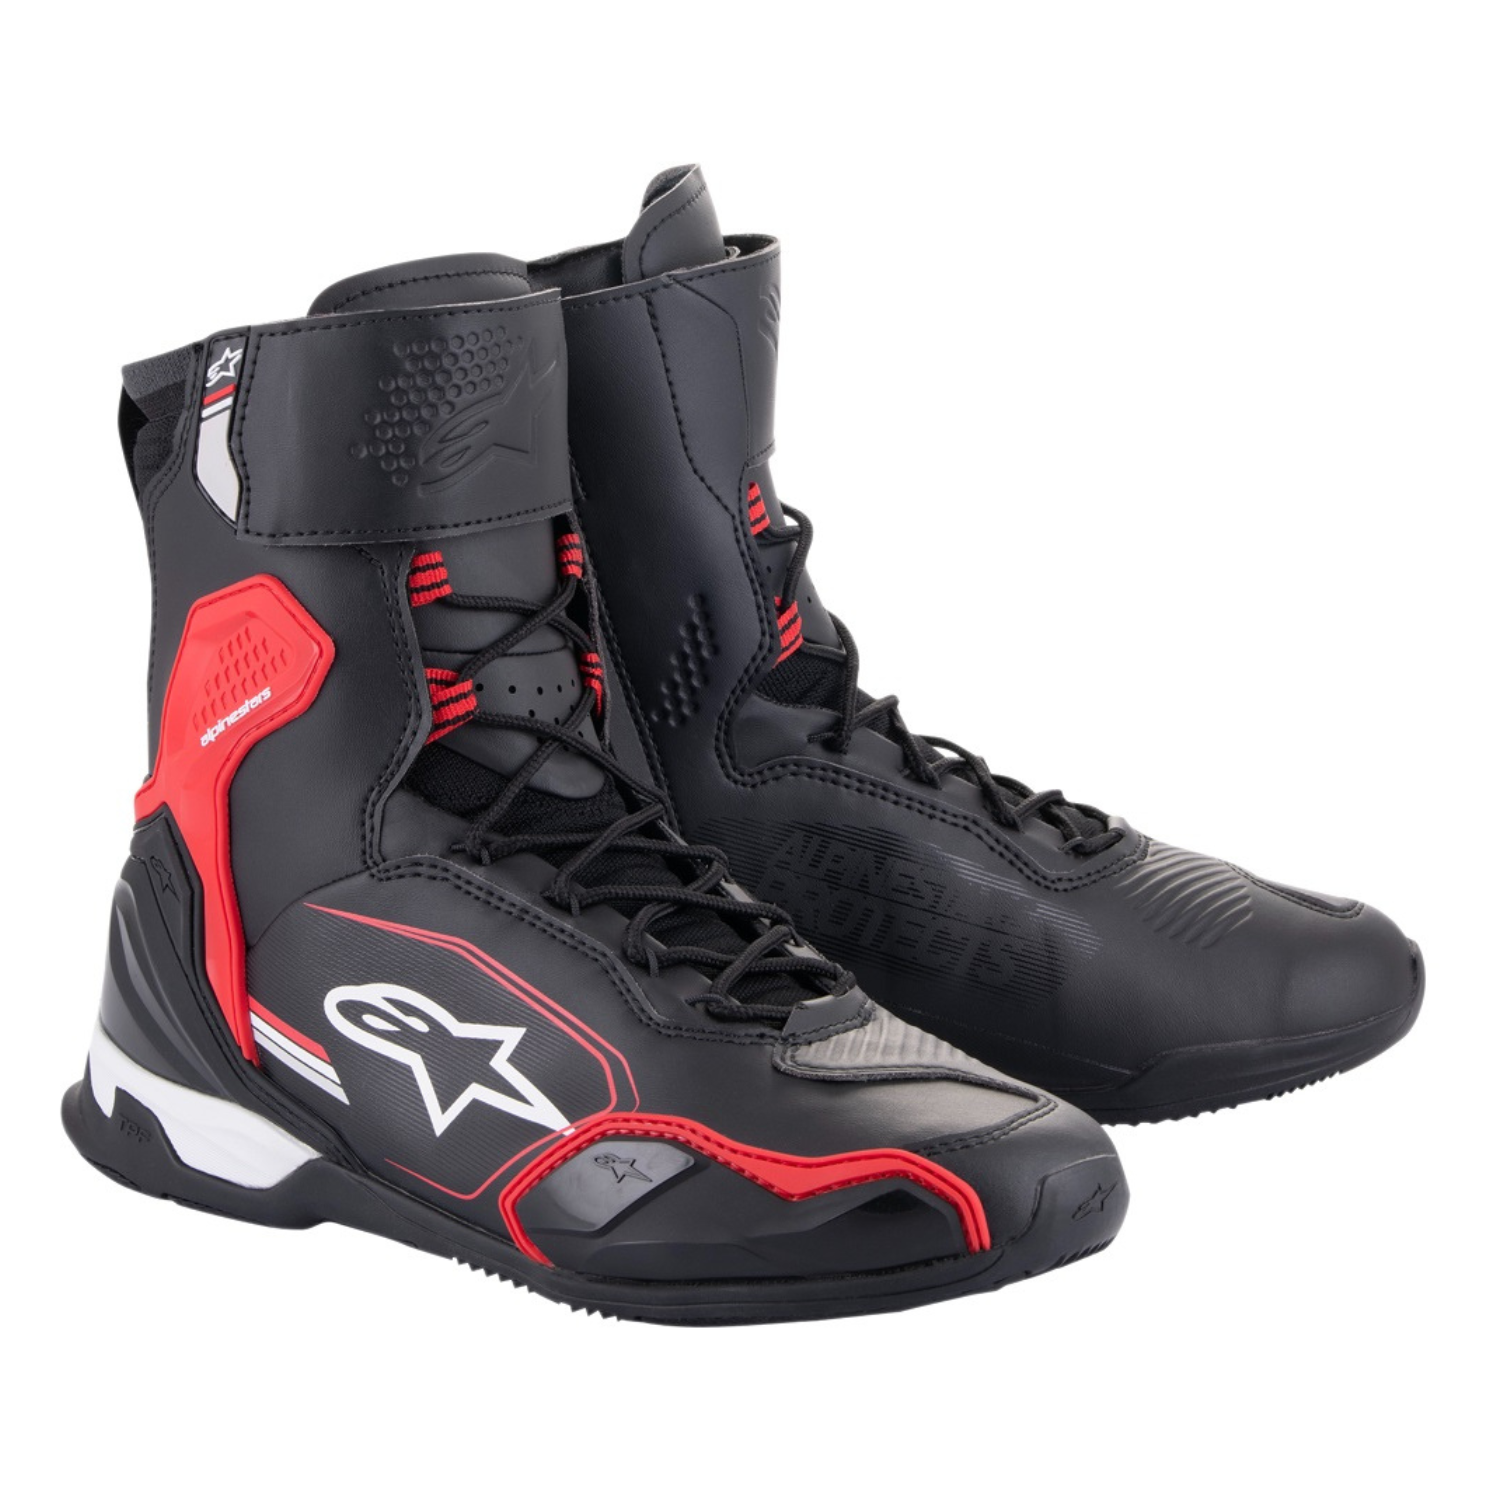 Image of Alpinestars Superfaster Shoes Black Bright Red White Size US 85 ID 8059347260952